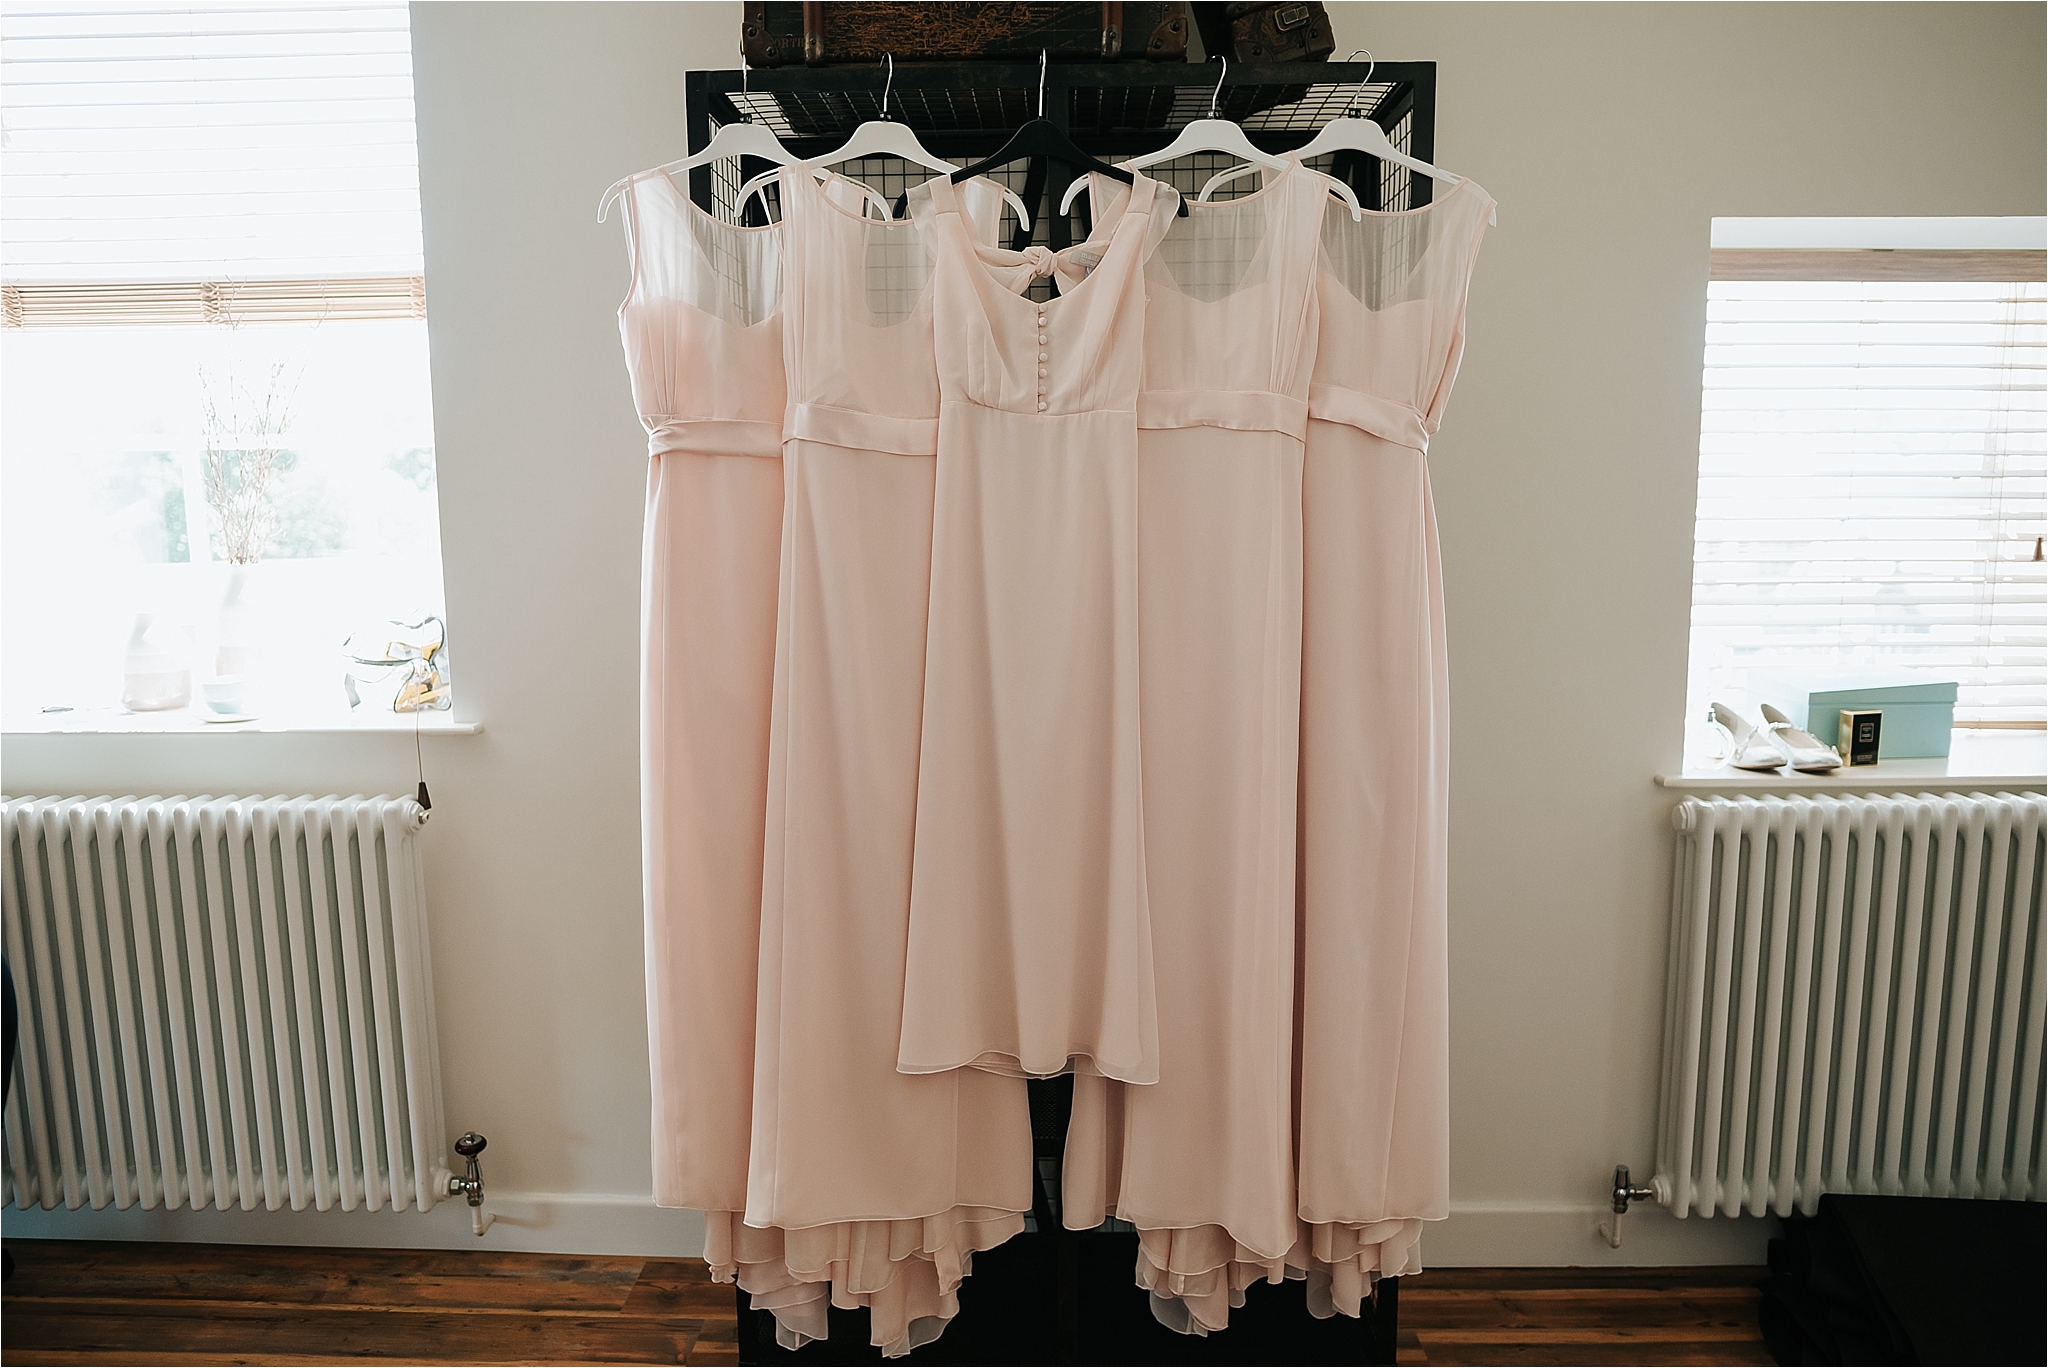 bridesmaids dresses hanging up in the penthouse at the spinning block hotel, clitheroe 